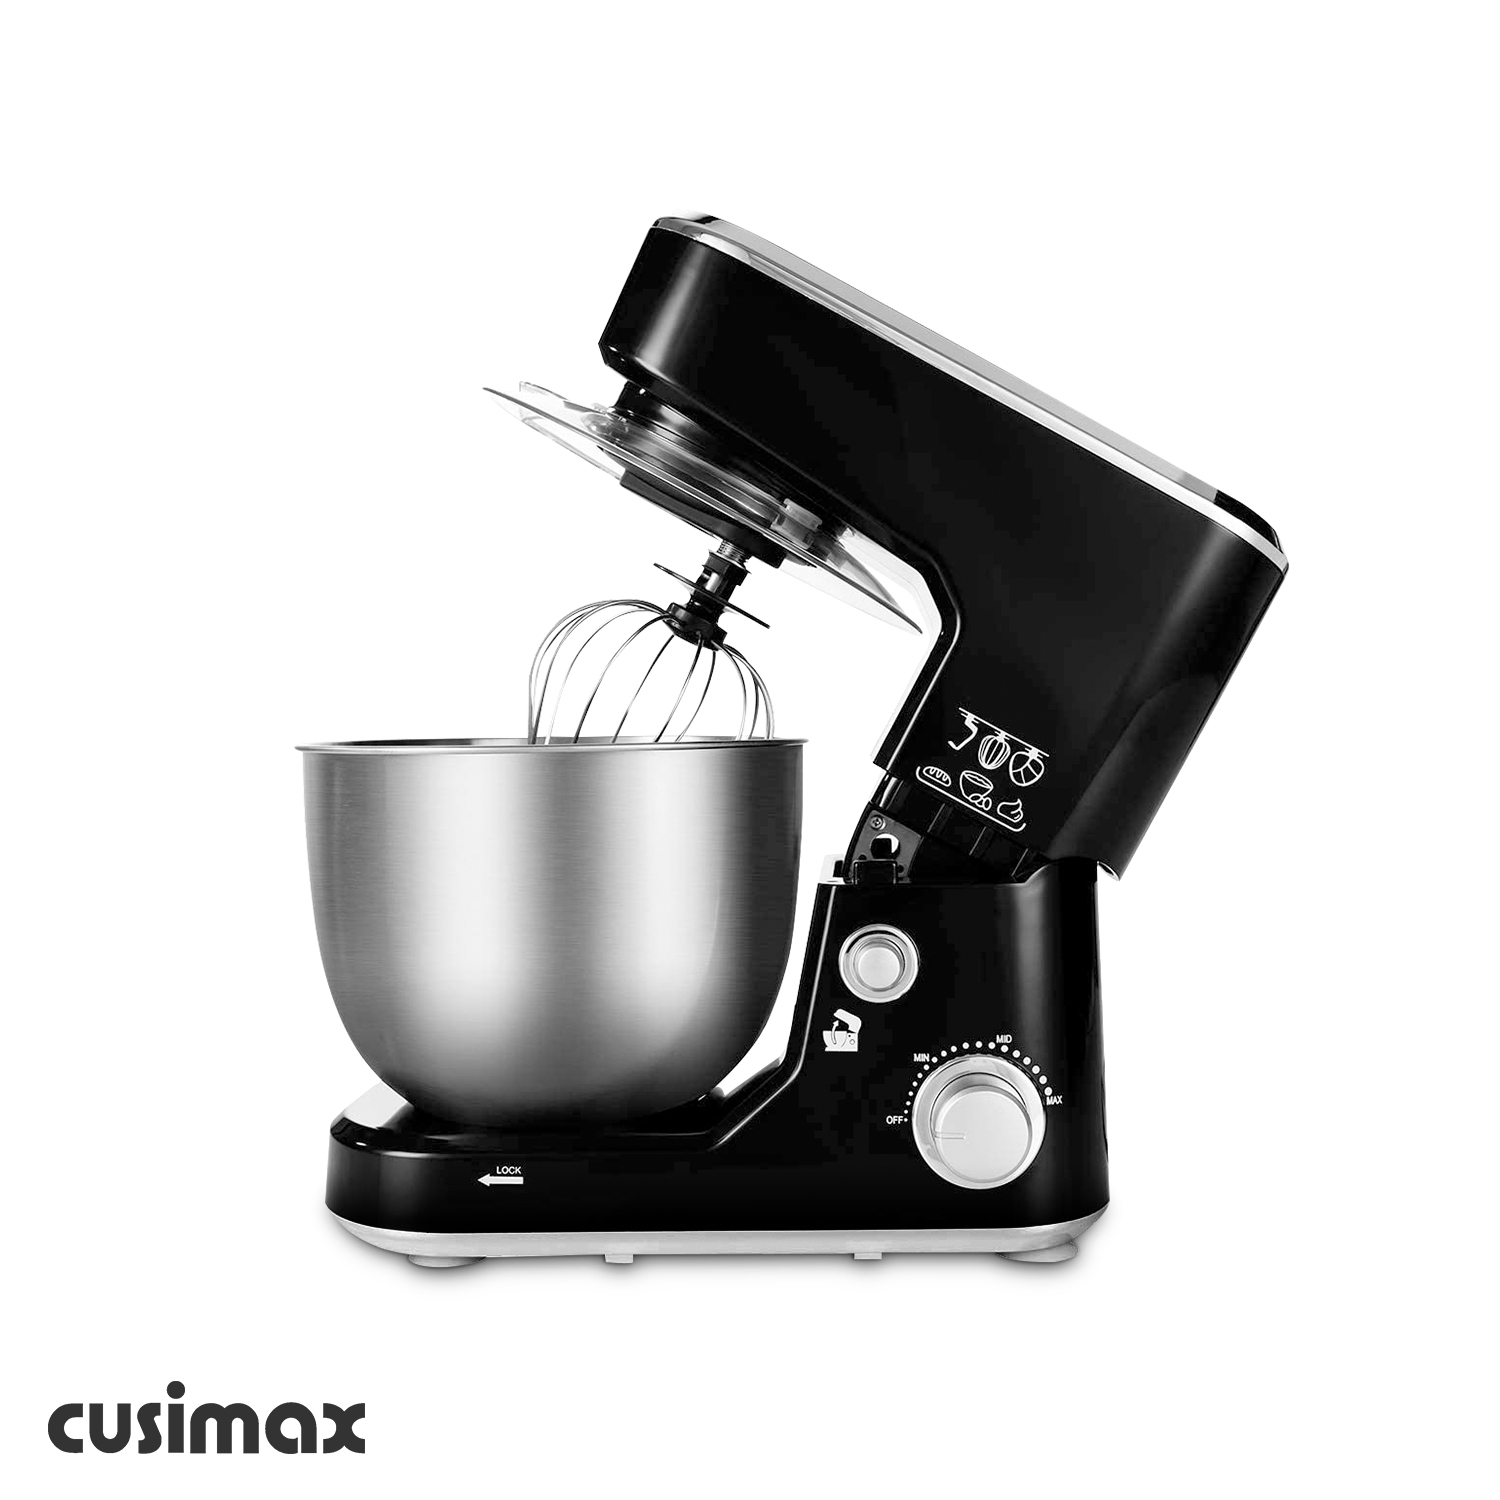 Cusimax Black Stand Mixer With 5-Quart Stainless Steel Bowl-Cusimax